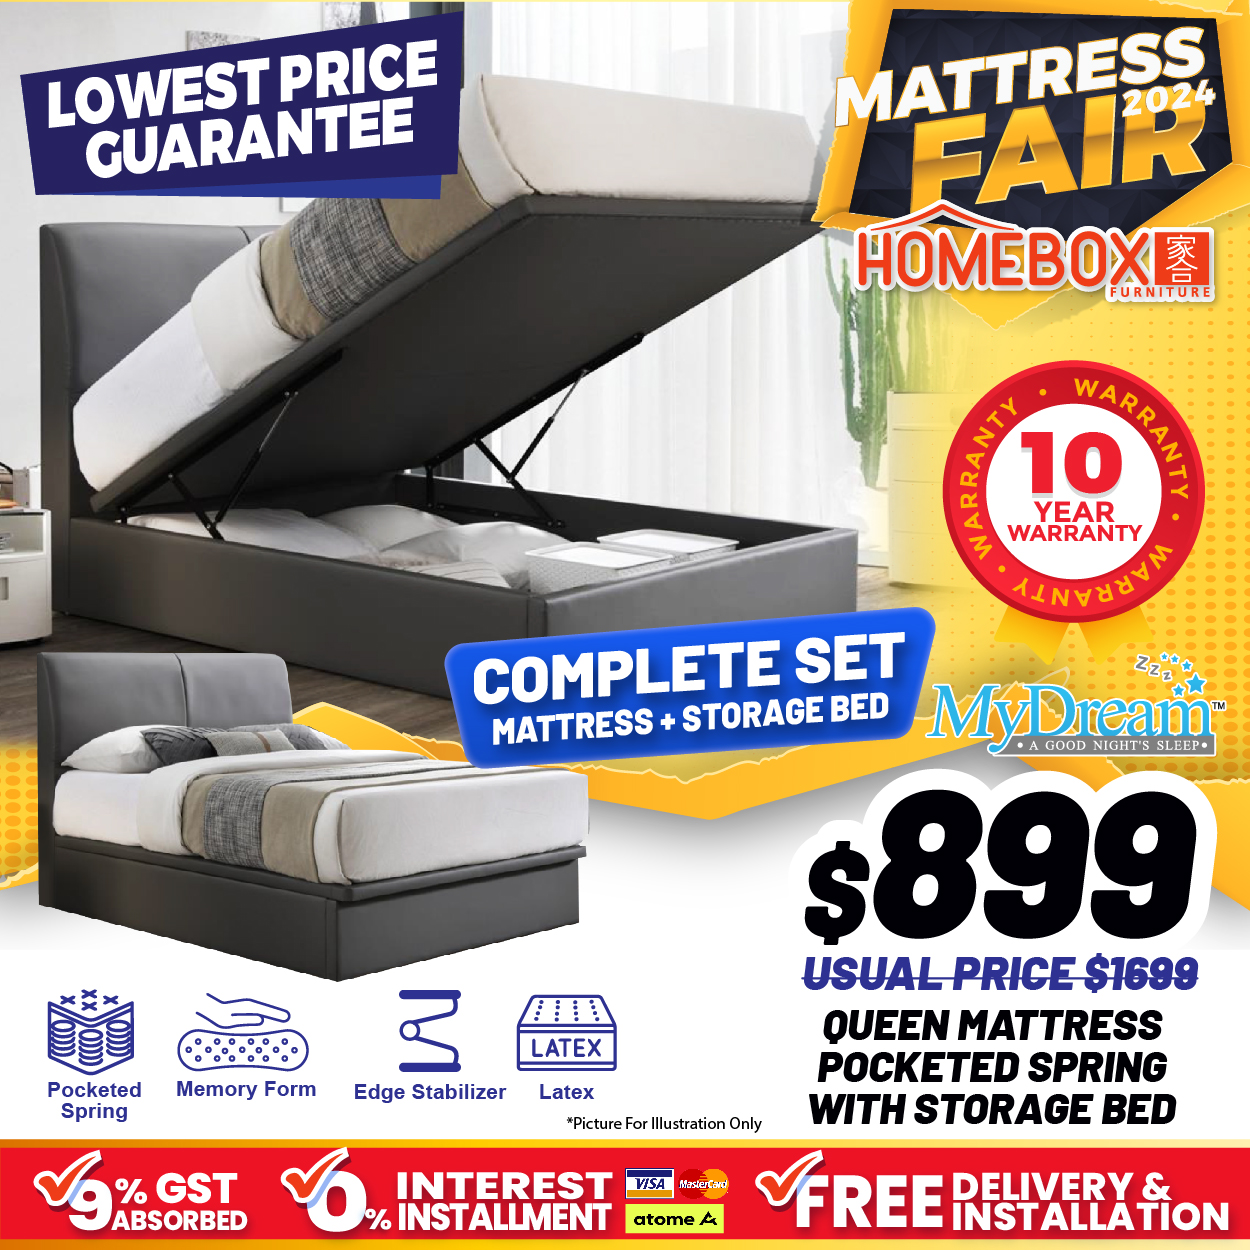 Lobang: Homebox's Biggest Mattress Fair in Aljunied Has Everything At Up To 80% Off From Now Till 5 May 24. Get A Free Mattres Upgrade During The Sale! - 13